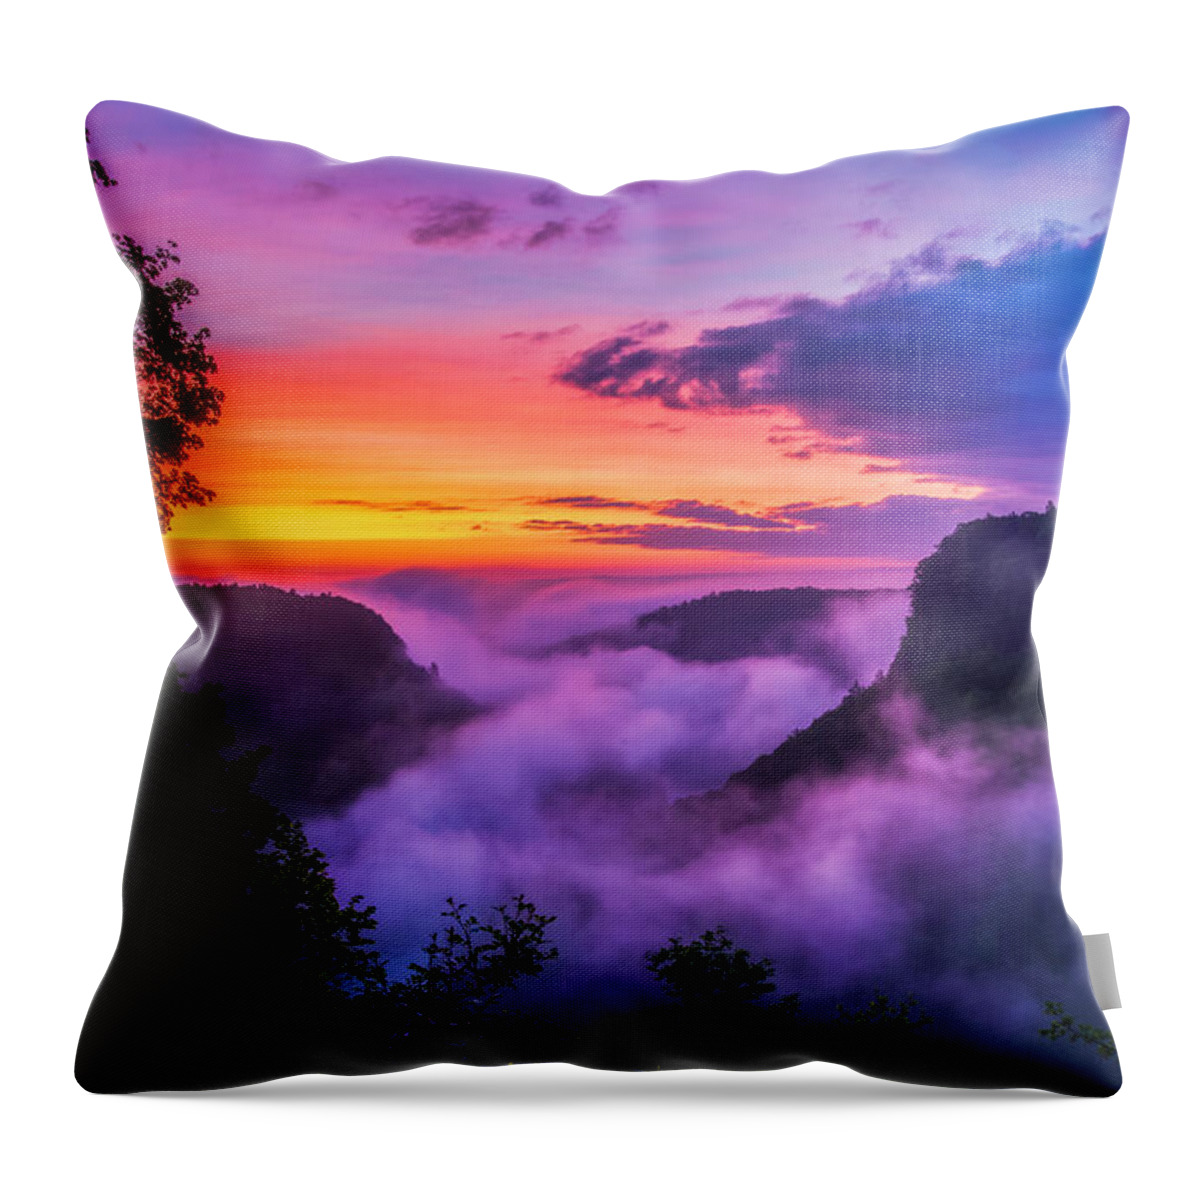 Letchworth State Park Throw Pillow featuring the photograph Letchworth sunrise by Mark Papke